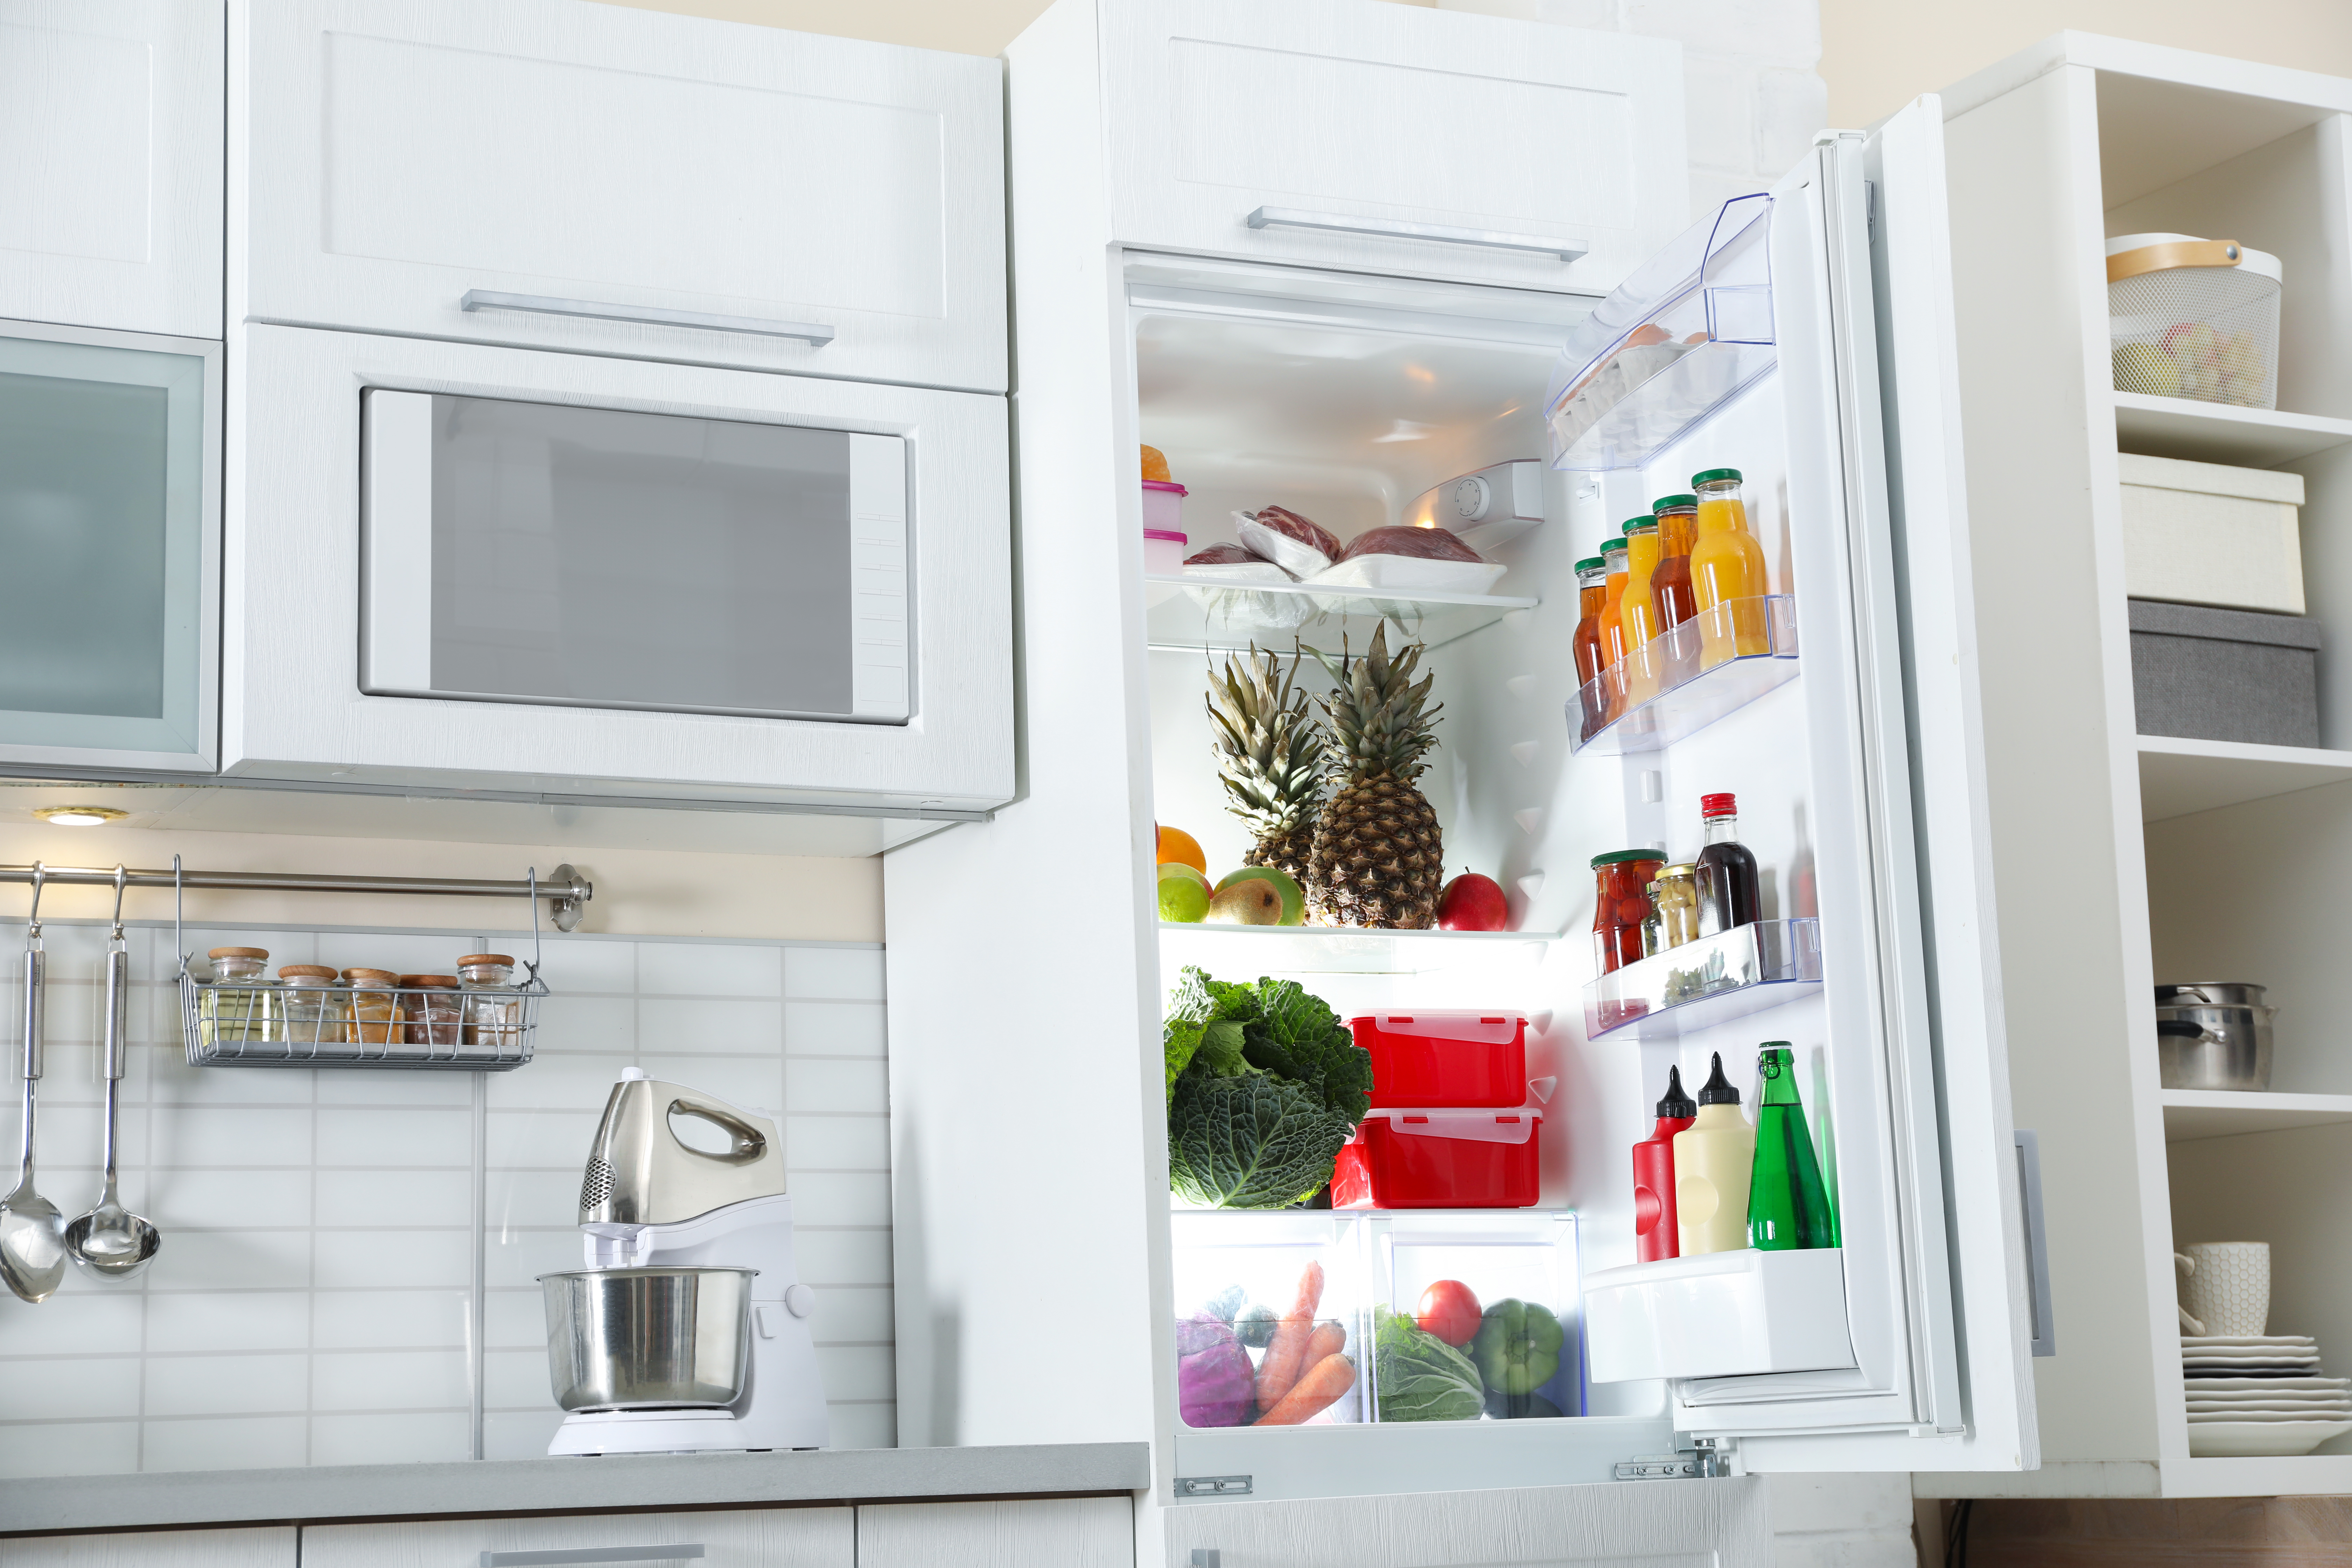 Maintenance in a Minute: How To Replace A Whirlpool Fridge Light